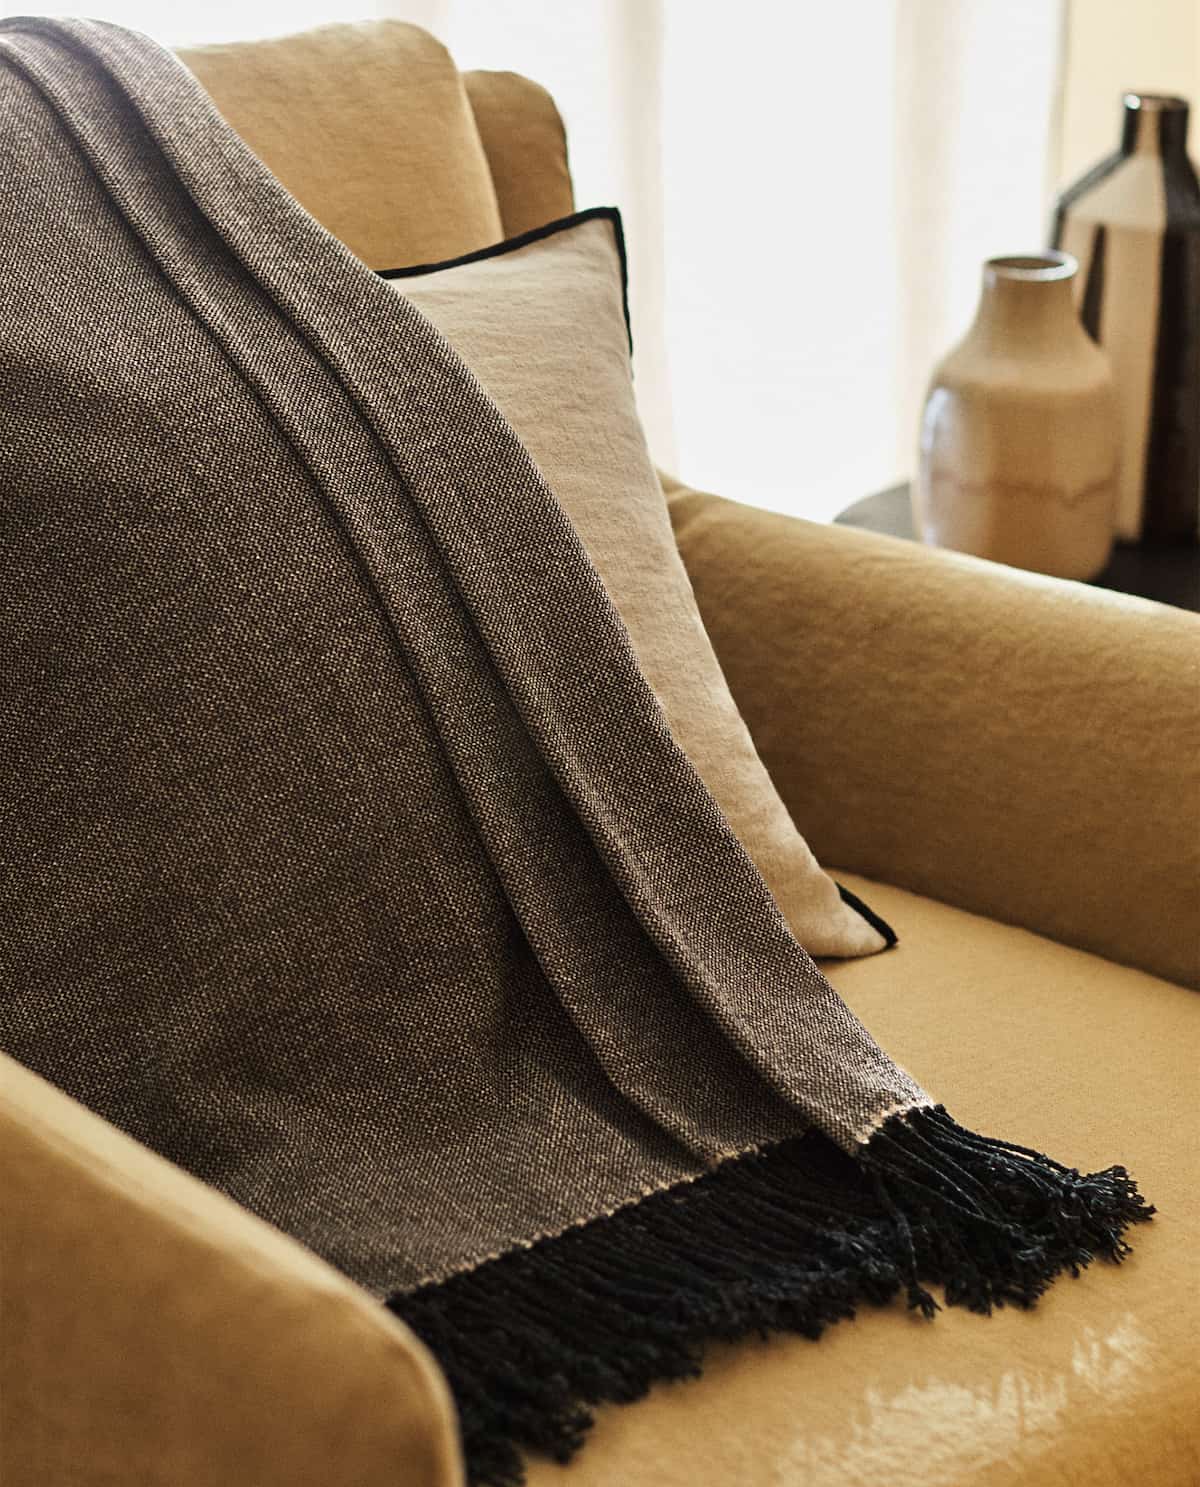 10 Neutral Color Blankets To Fit Your Minimal Home Décor